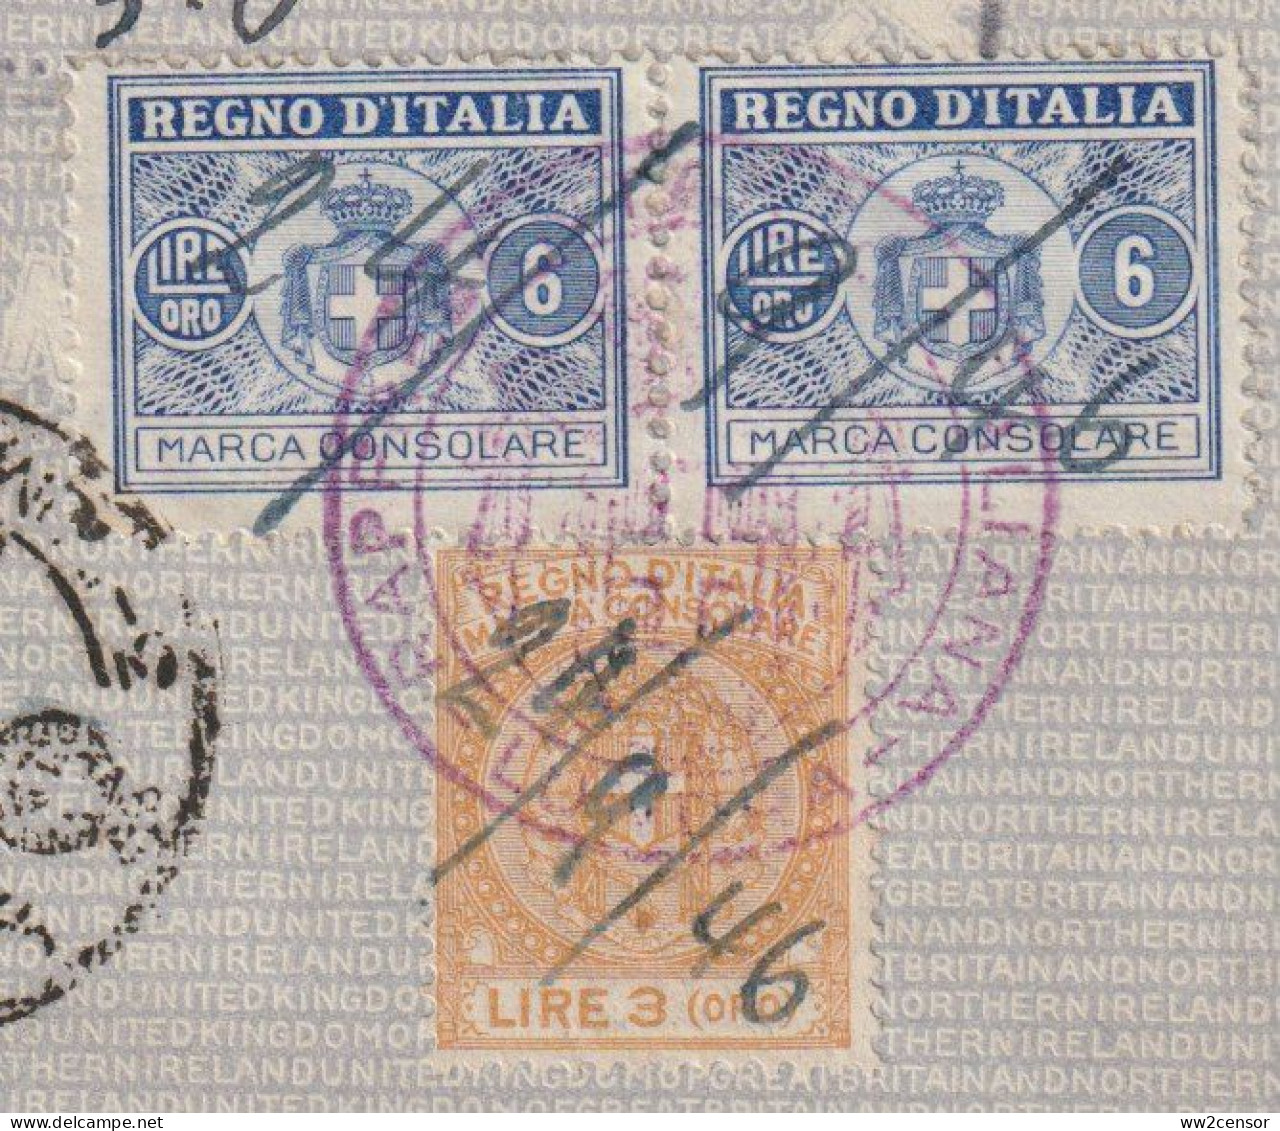 Italy 1946 - Italian Fiscal Revenue Stamps On A Visa On A Passport Page - Fiscales